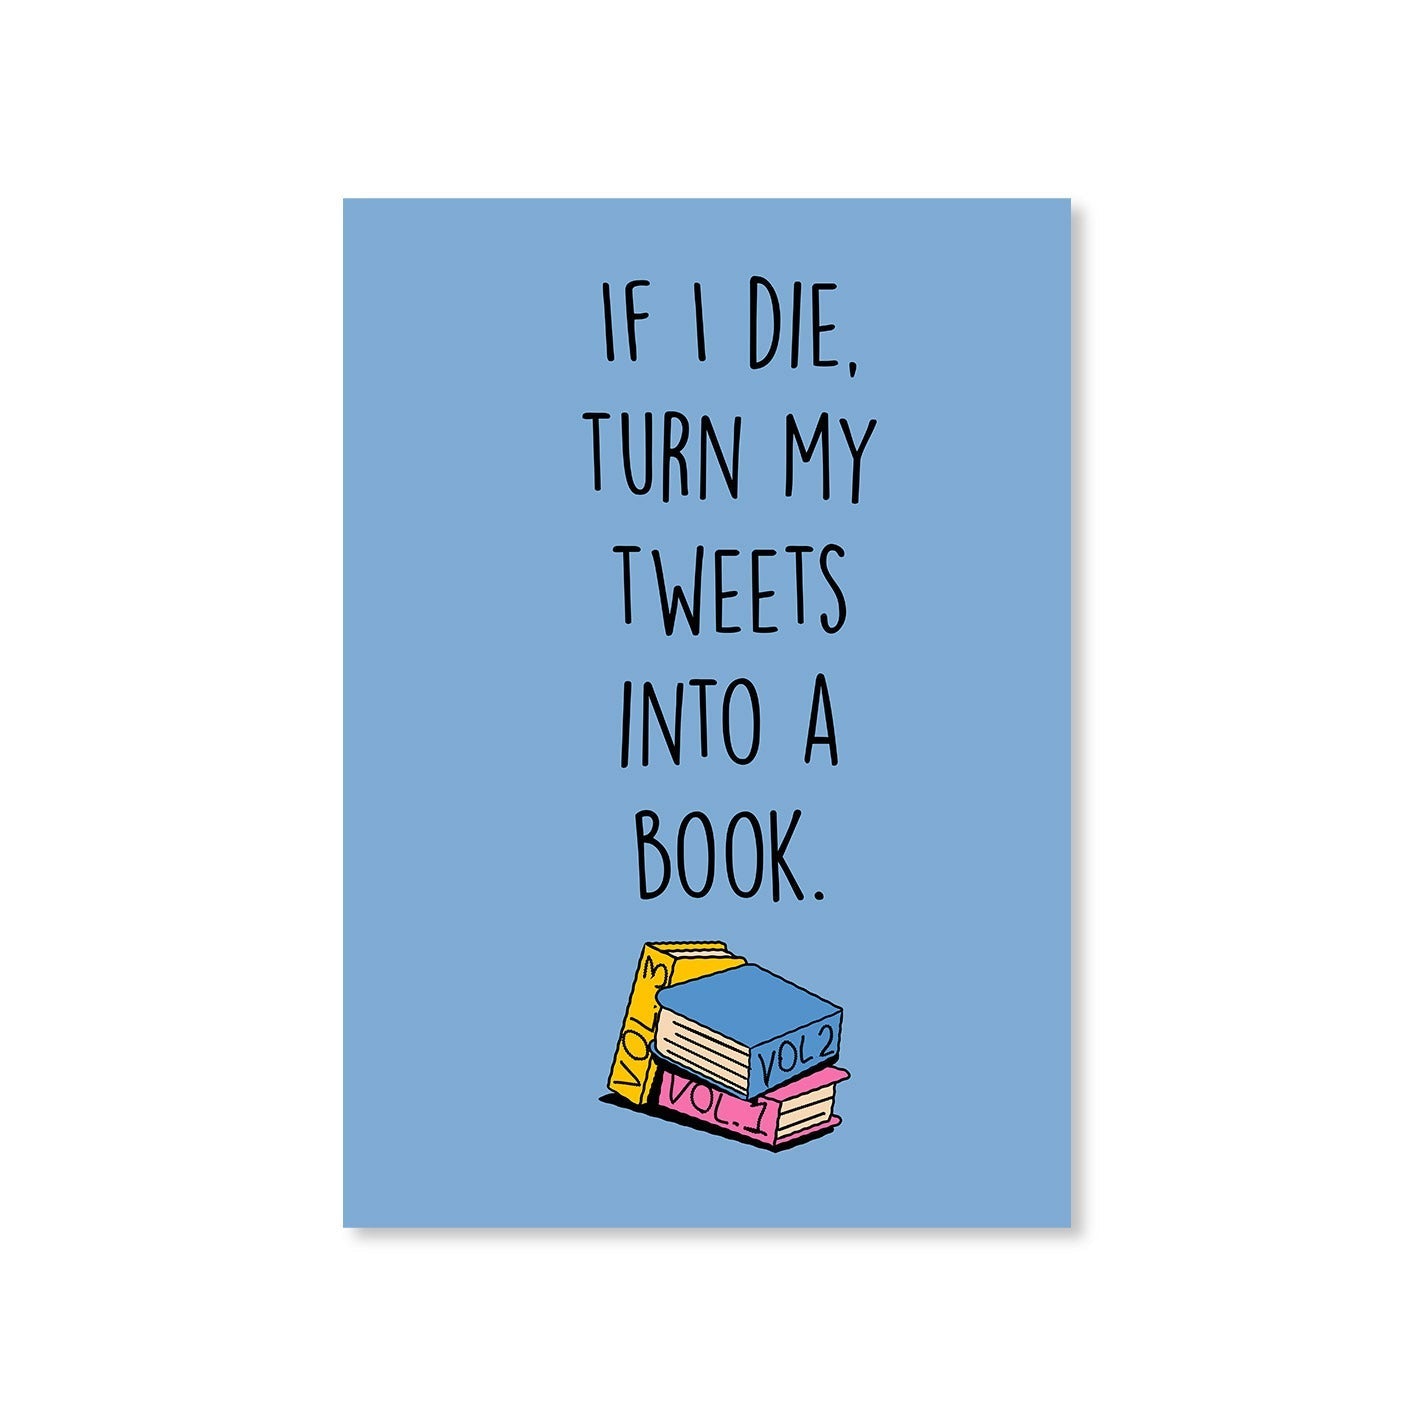 brooklyn nine-nine turn my tweets into books poster wall art buy online united states of america usa the banyan tee tbt a4 stranger things eleven demogorgon shadow monster dustin quote vector art clothing accessories merchandise